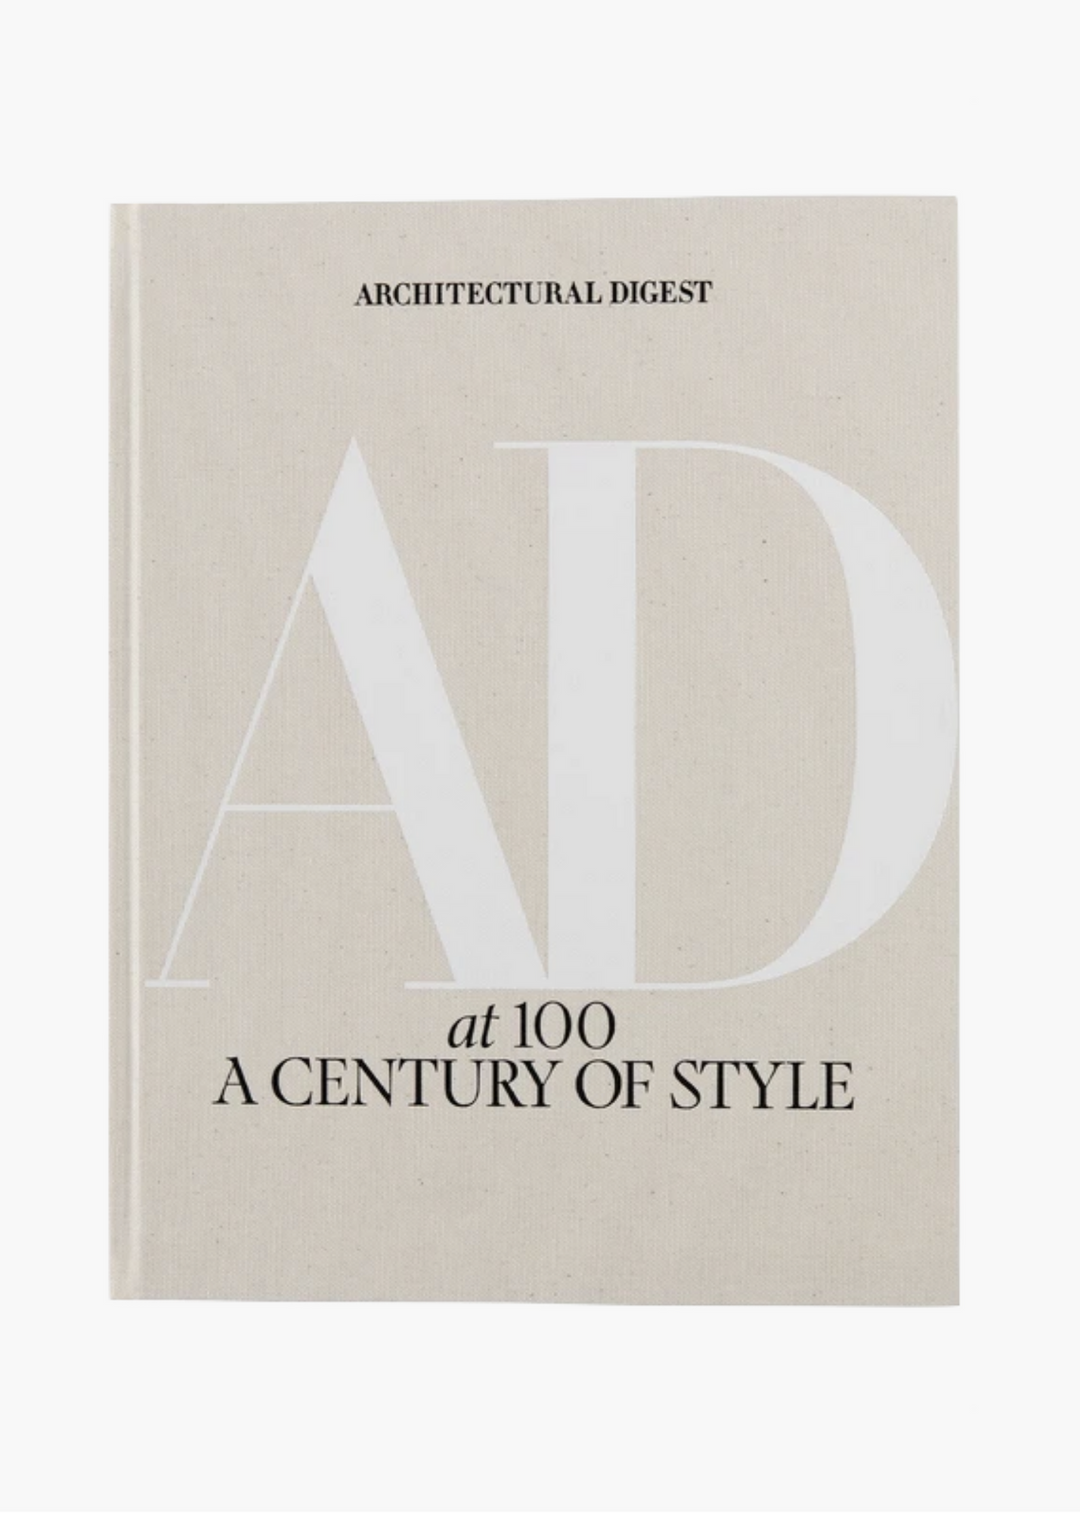 Architectural Digest at 100: A Century of Style